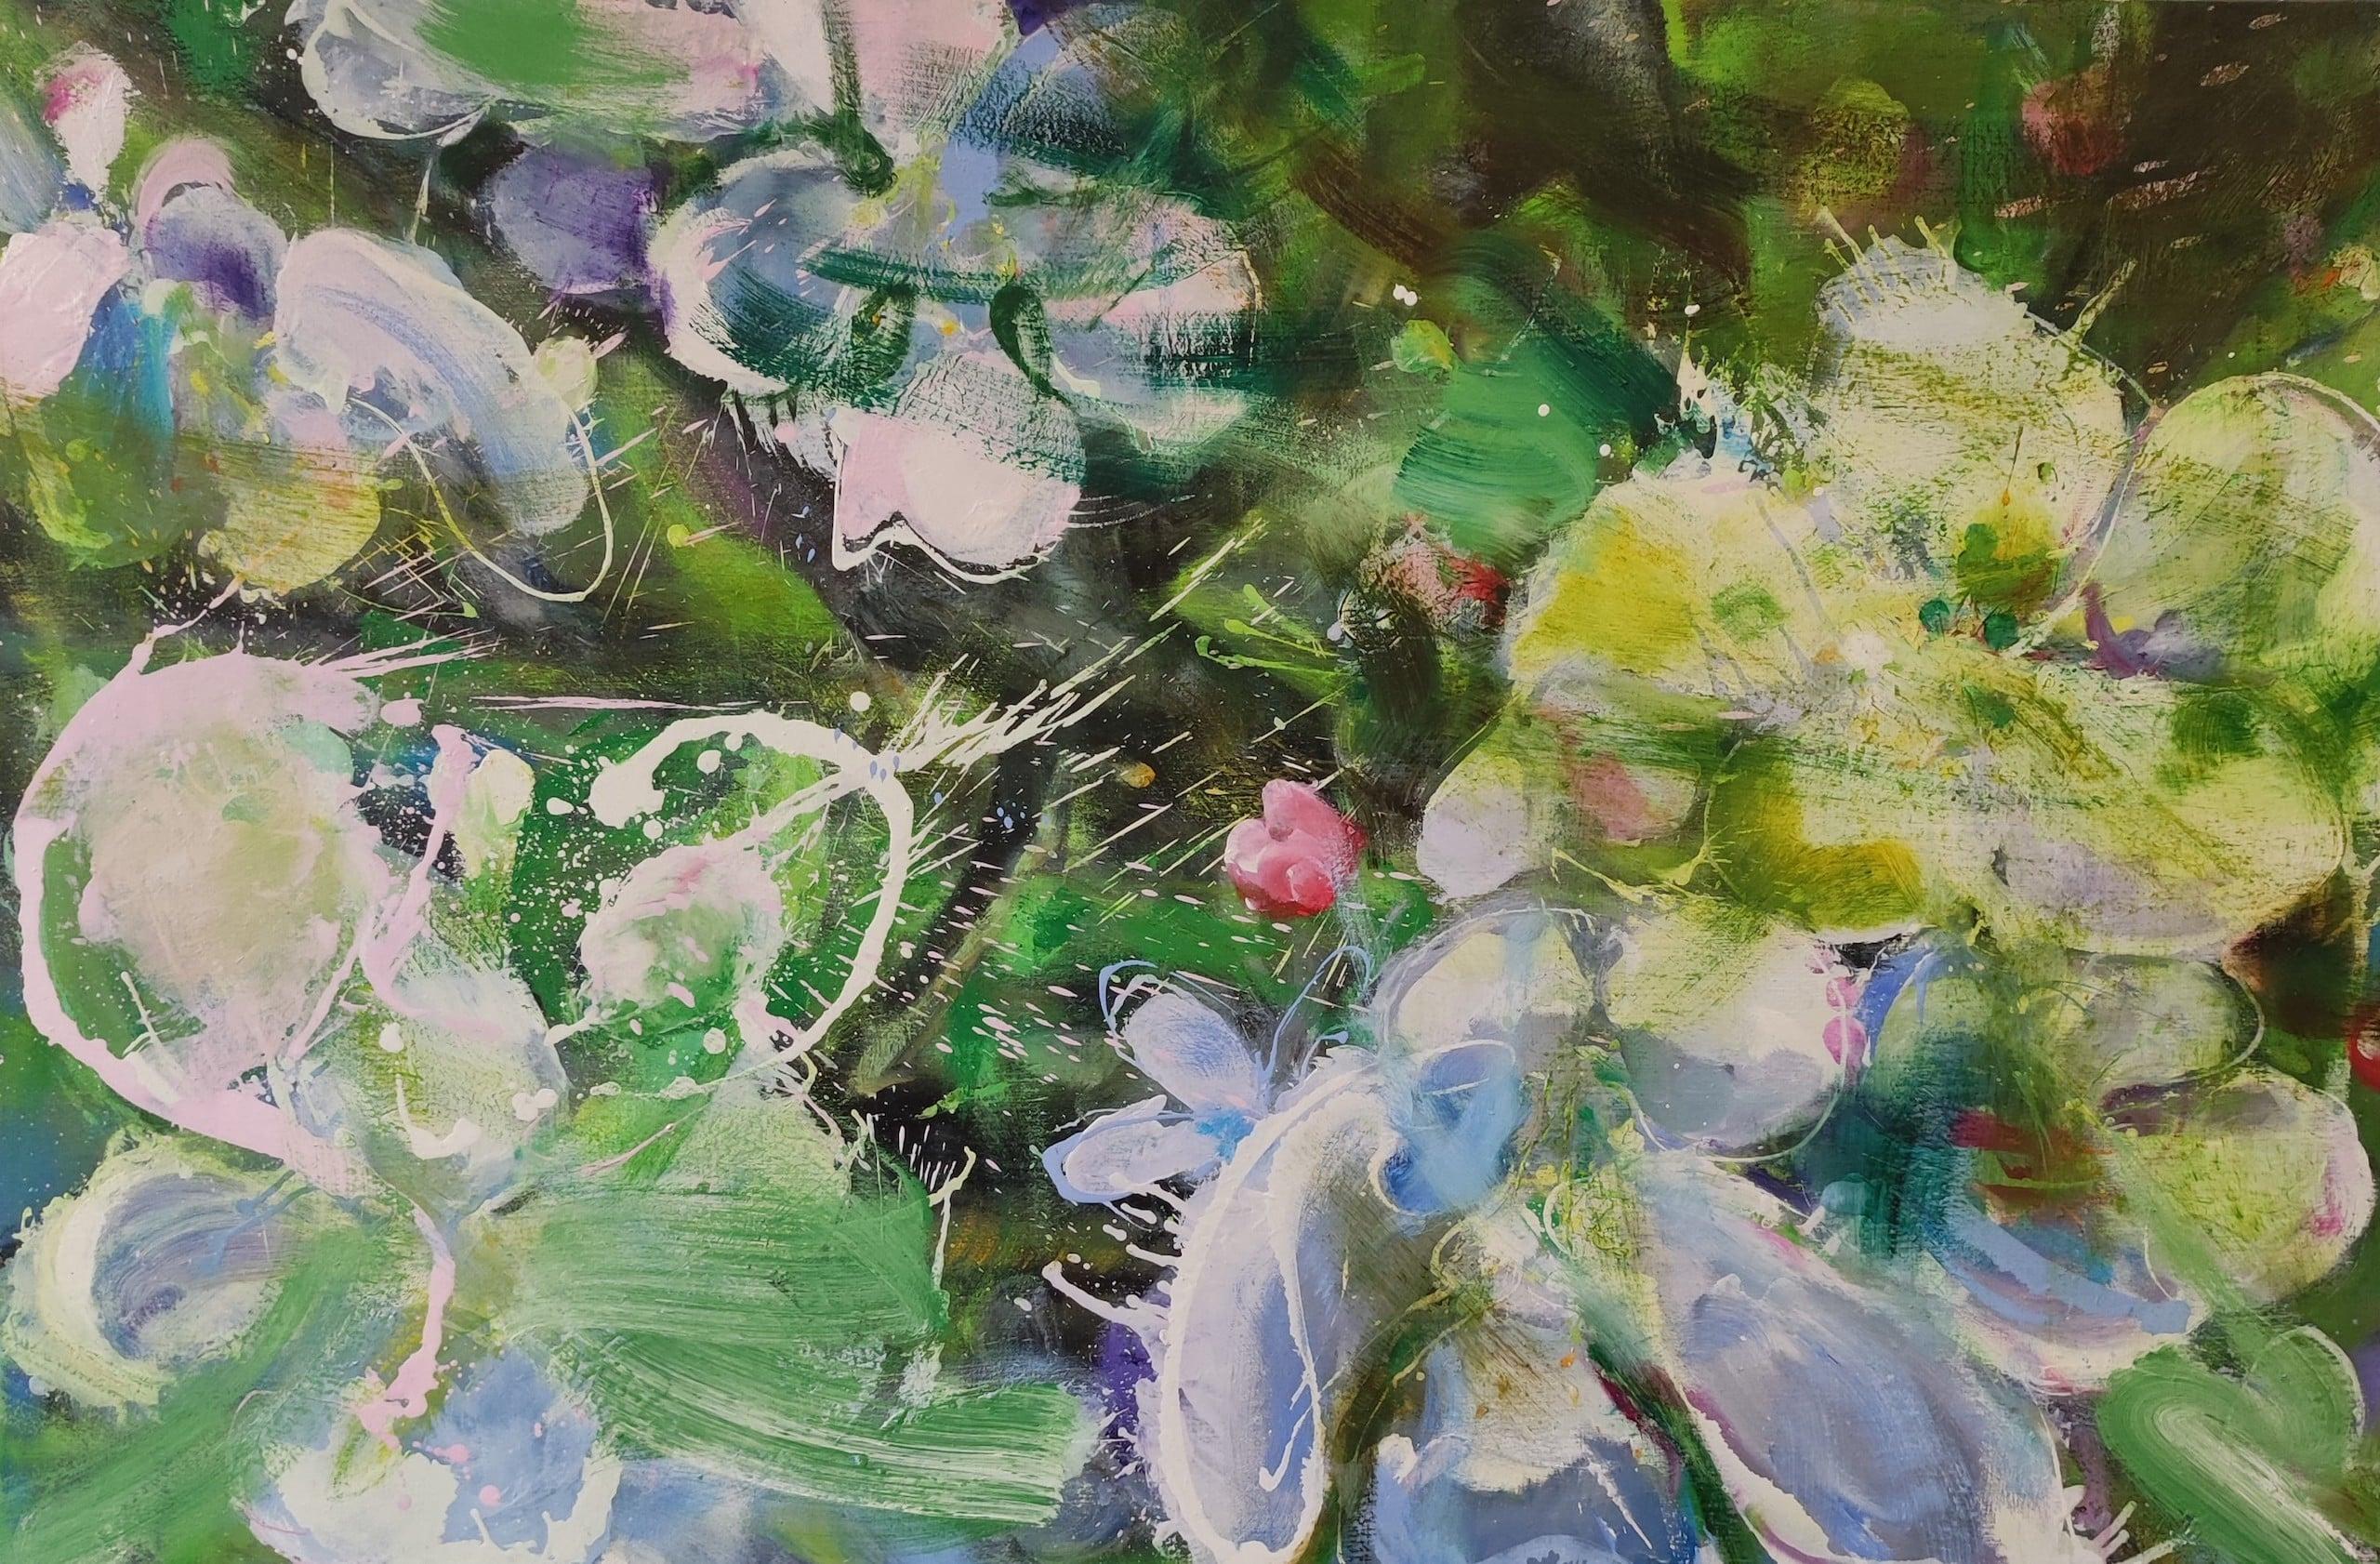 Spring (2023) by French contemporary artist Christophe Dupety. Oil on canvas, H 80 cm  W 120 cm.
This series focuses on floral motifs: Poppies, Catalpa flowers or Spindles. Christophe Dupety is looking for a sensation, an impression: the beauty of